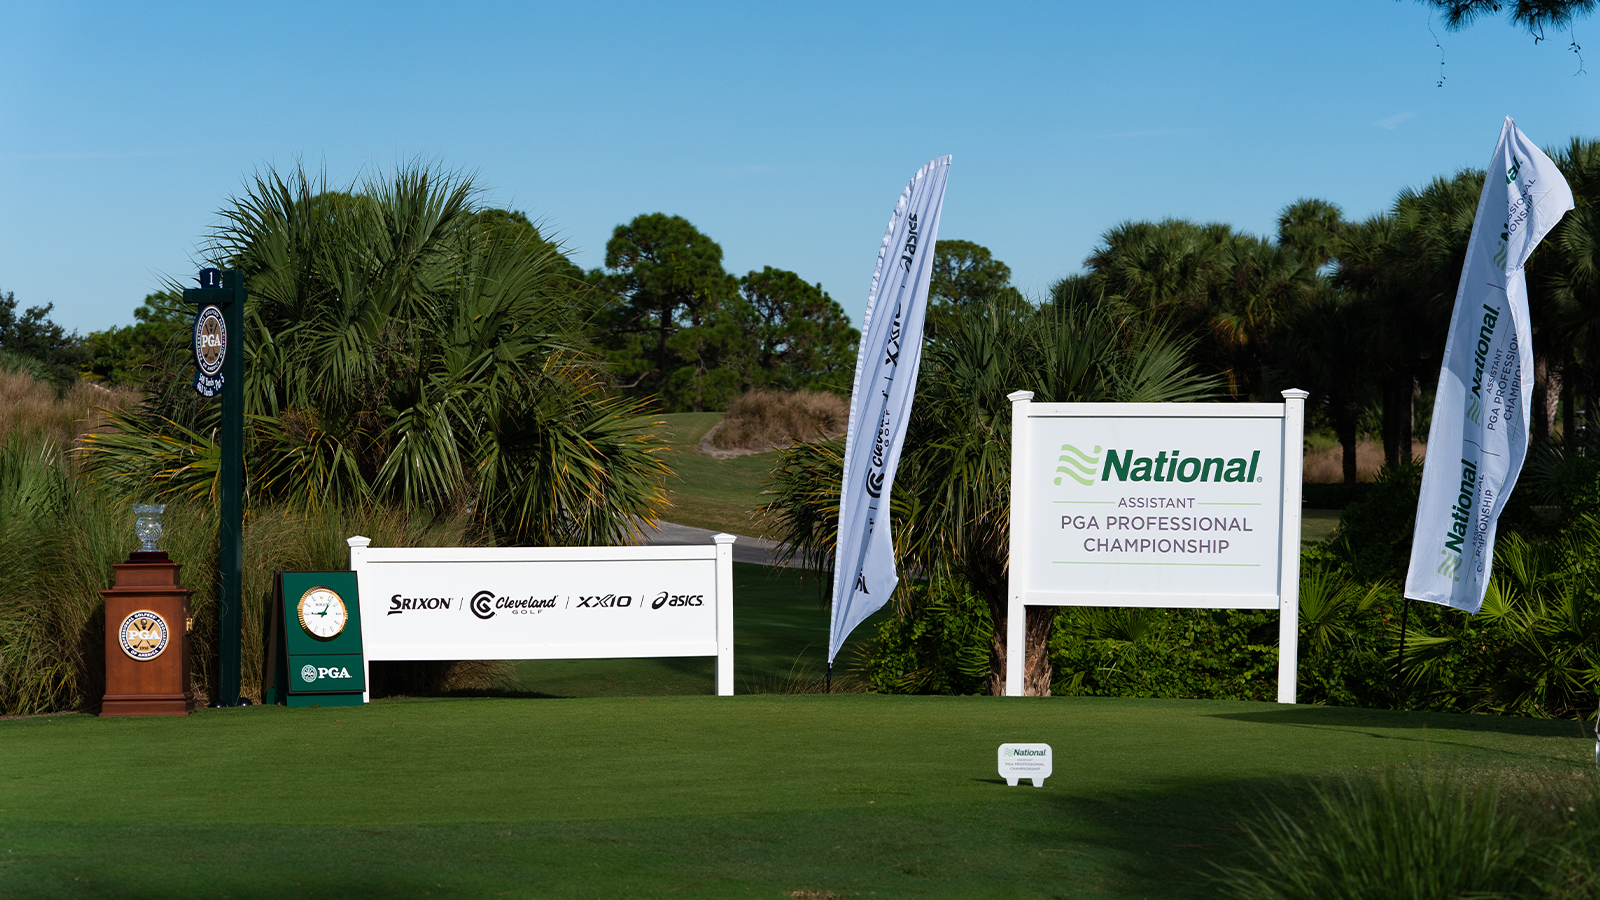 Signage during the final round of the 45th National Car Rental Assistant PGA Professional Championship held at the PGA Golf Club on November 14, 2021 in Port St. Lucie, Florida. (Photo by Hailey Garrett/PGA of America)